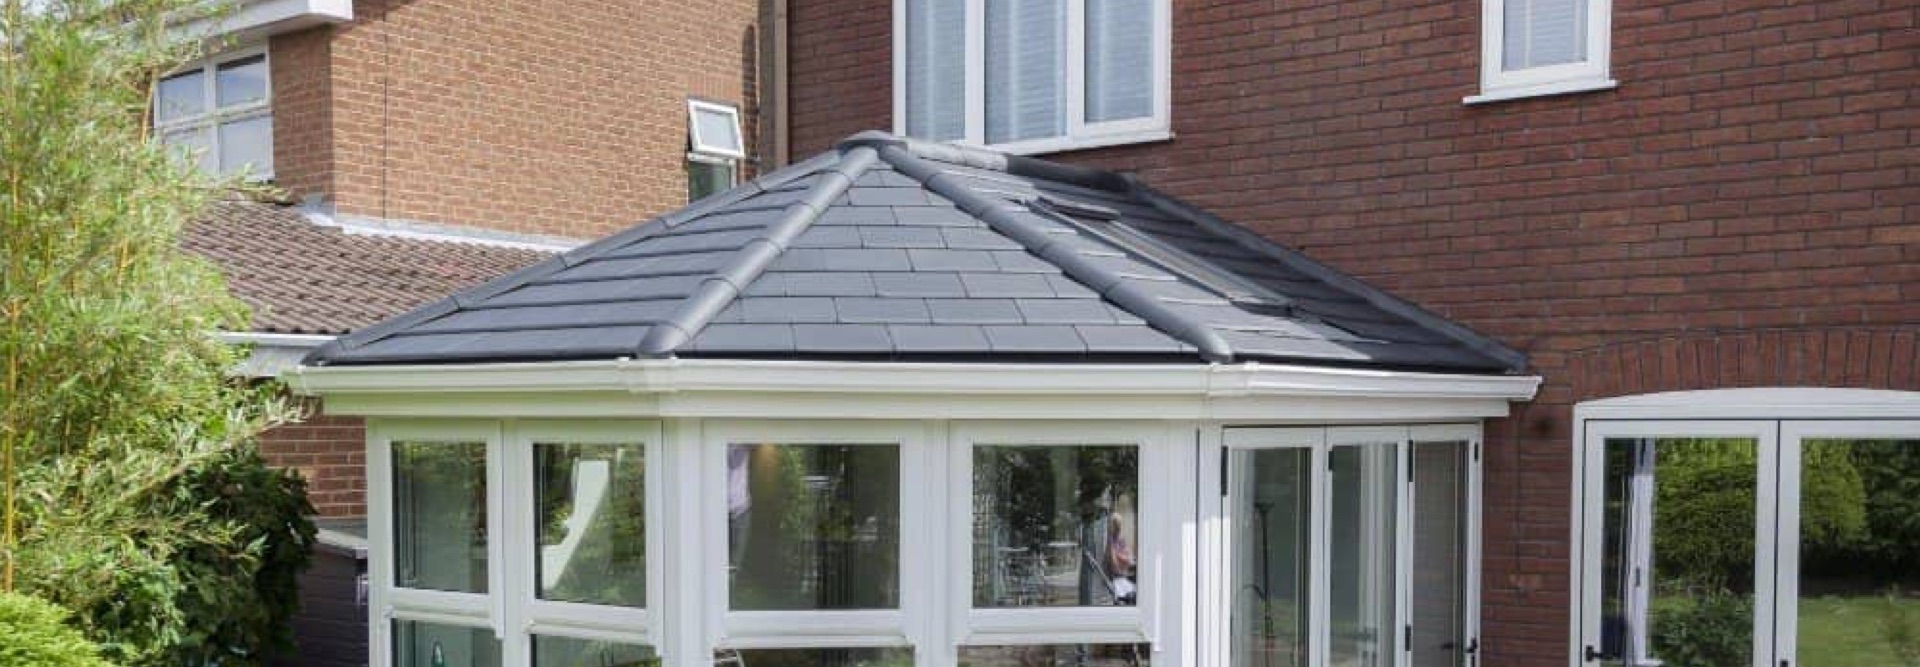 Conservatory Roof Replacement Helston